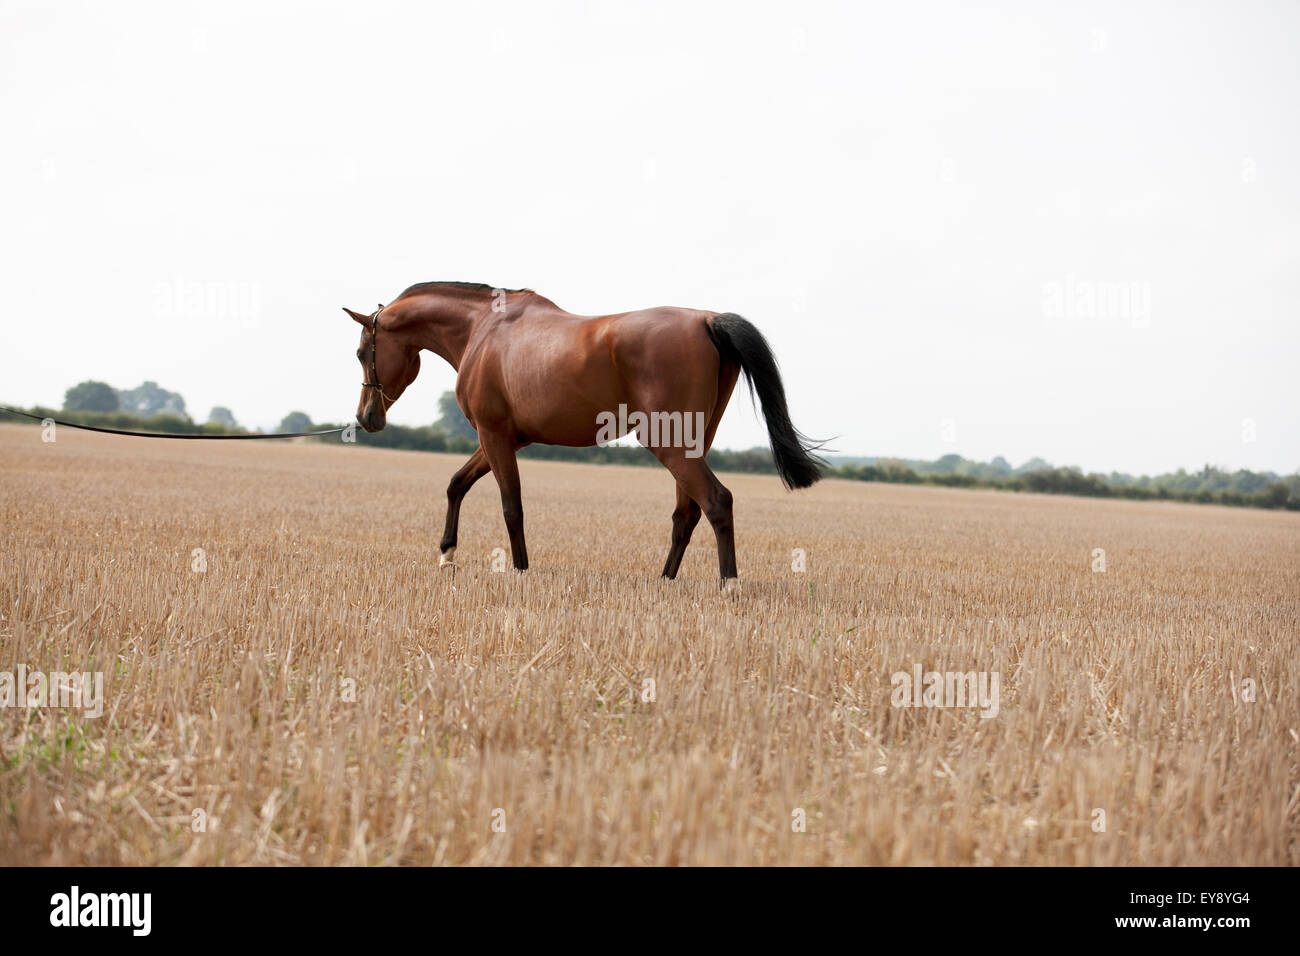 A bright bay pure bred Arabian horse walking in a stubble field, side view Stock Photo